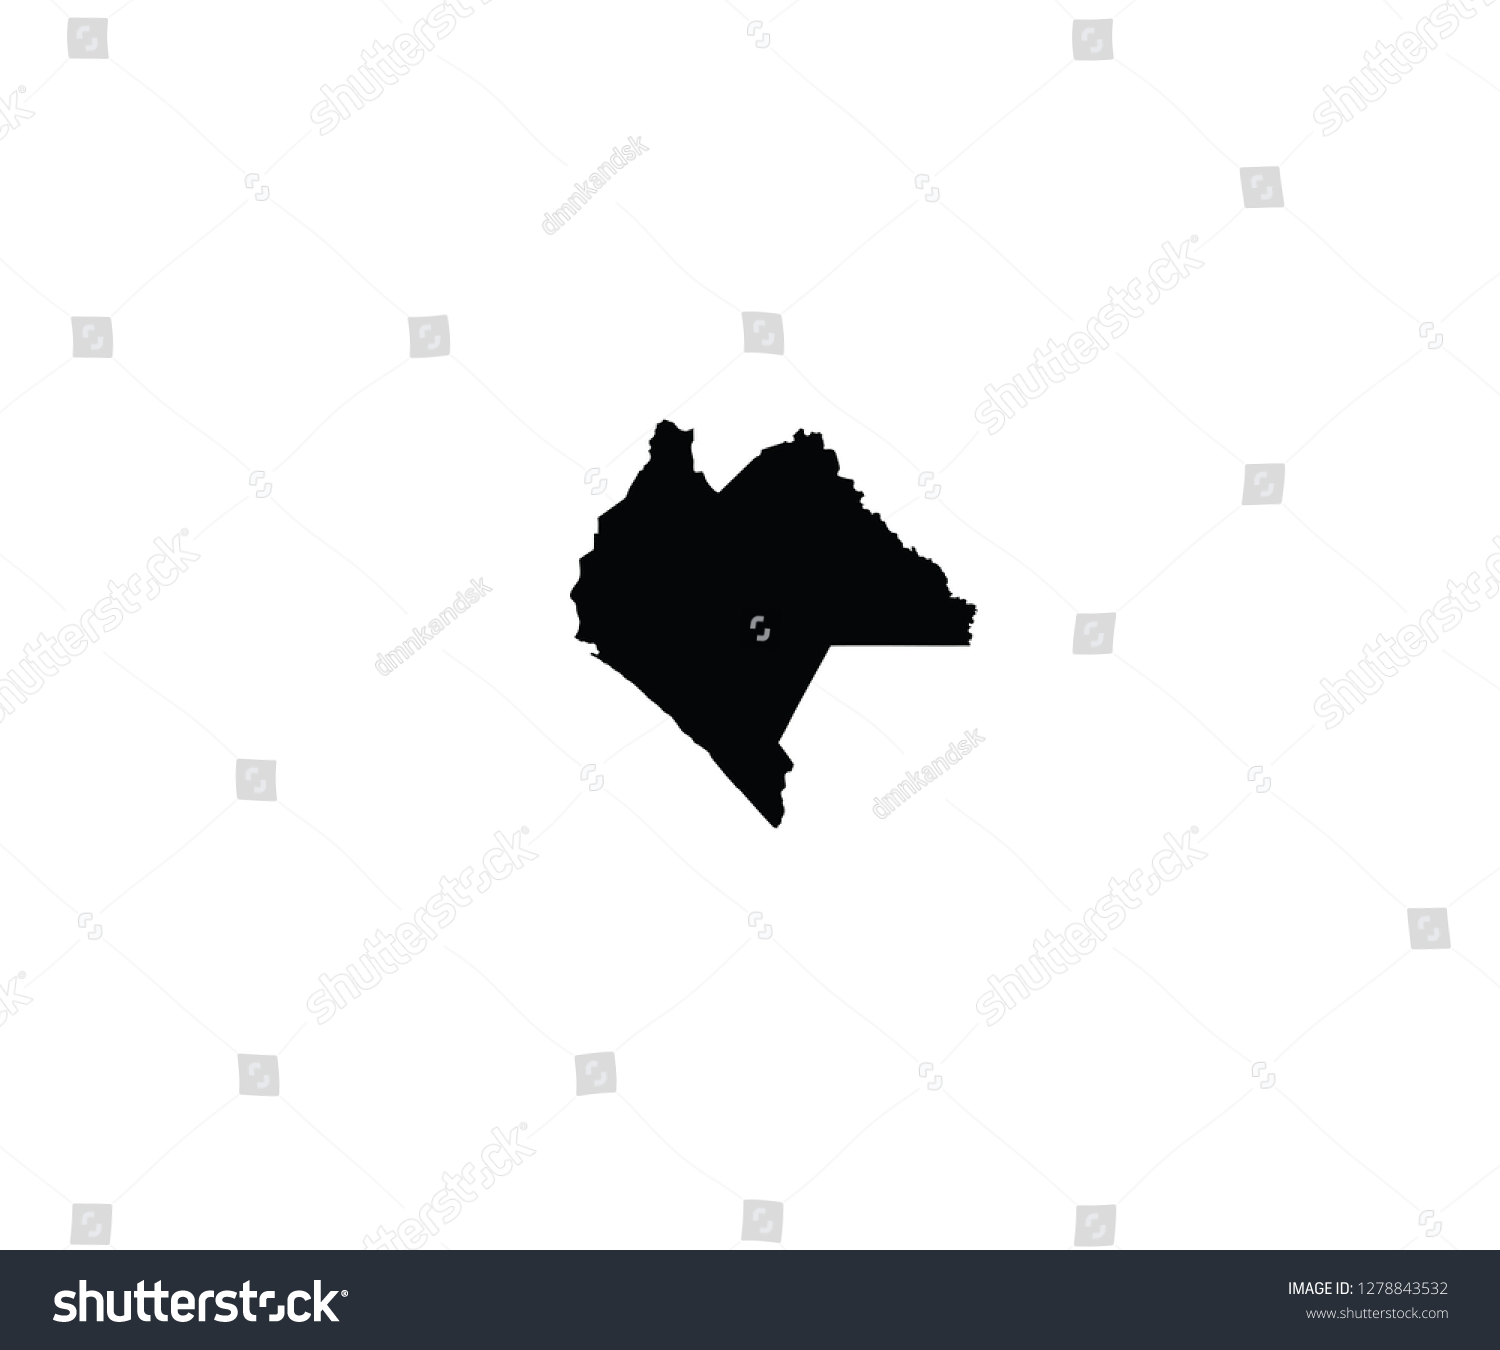 Chiapas Outline Map Mexico State Stock Vector Royalty Free 1278843532 Shutterstock 7569